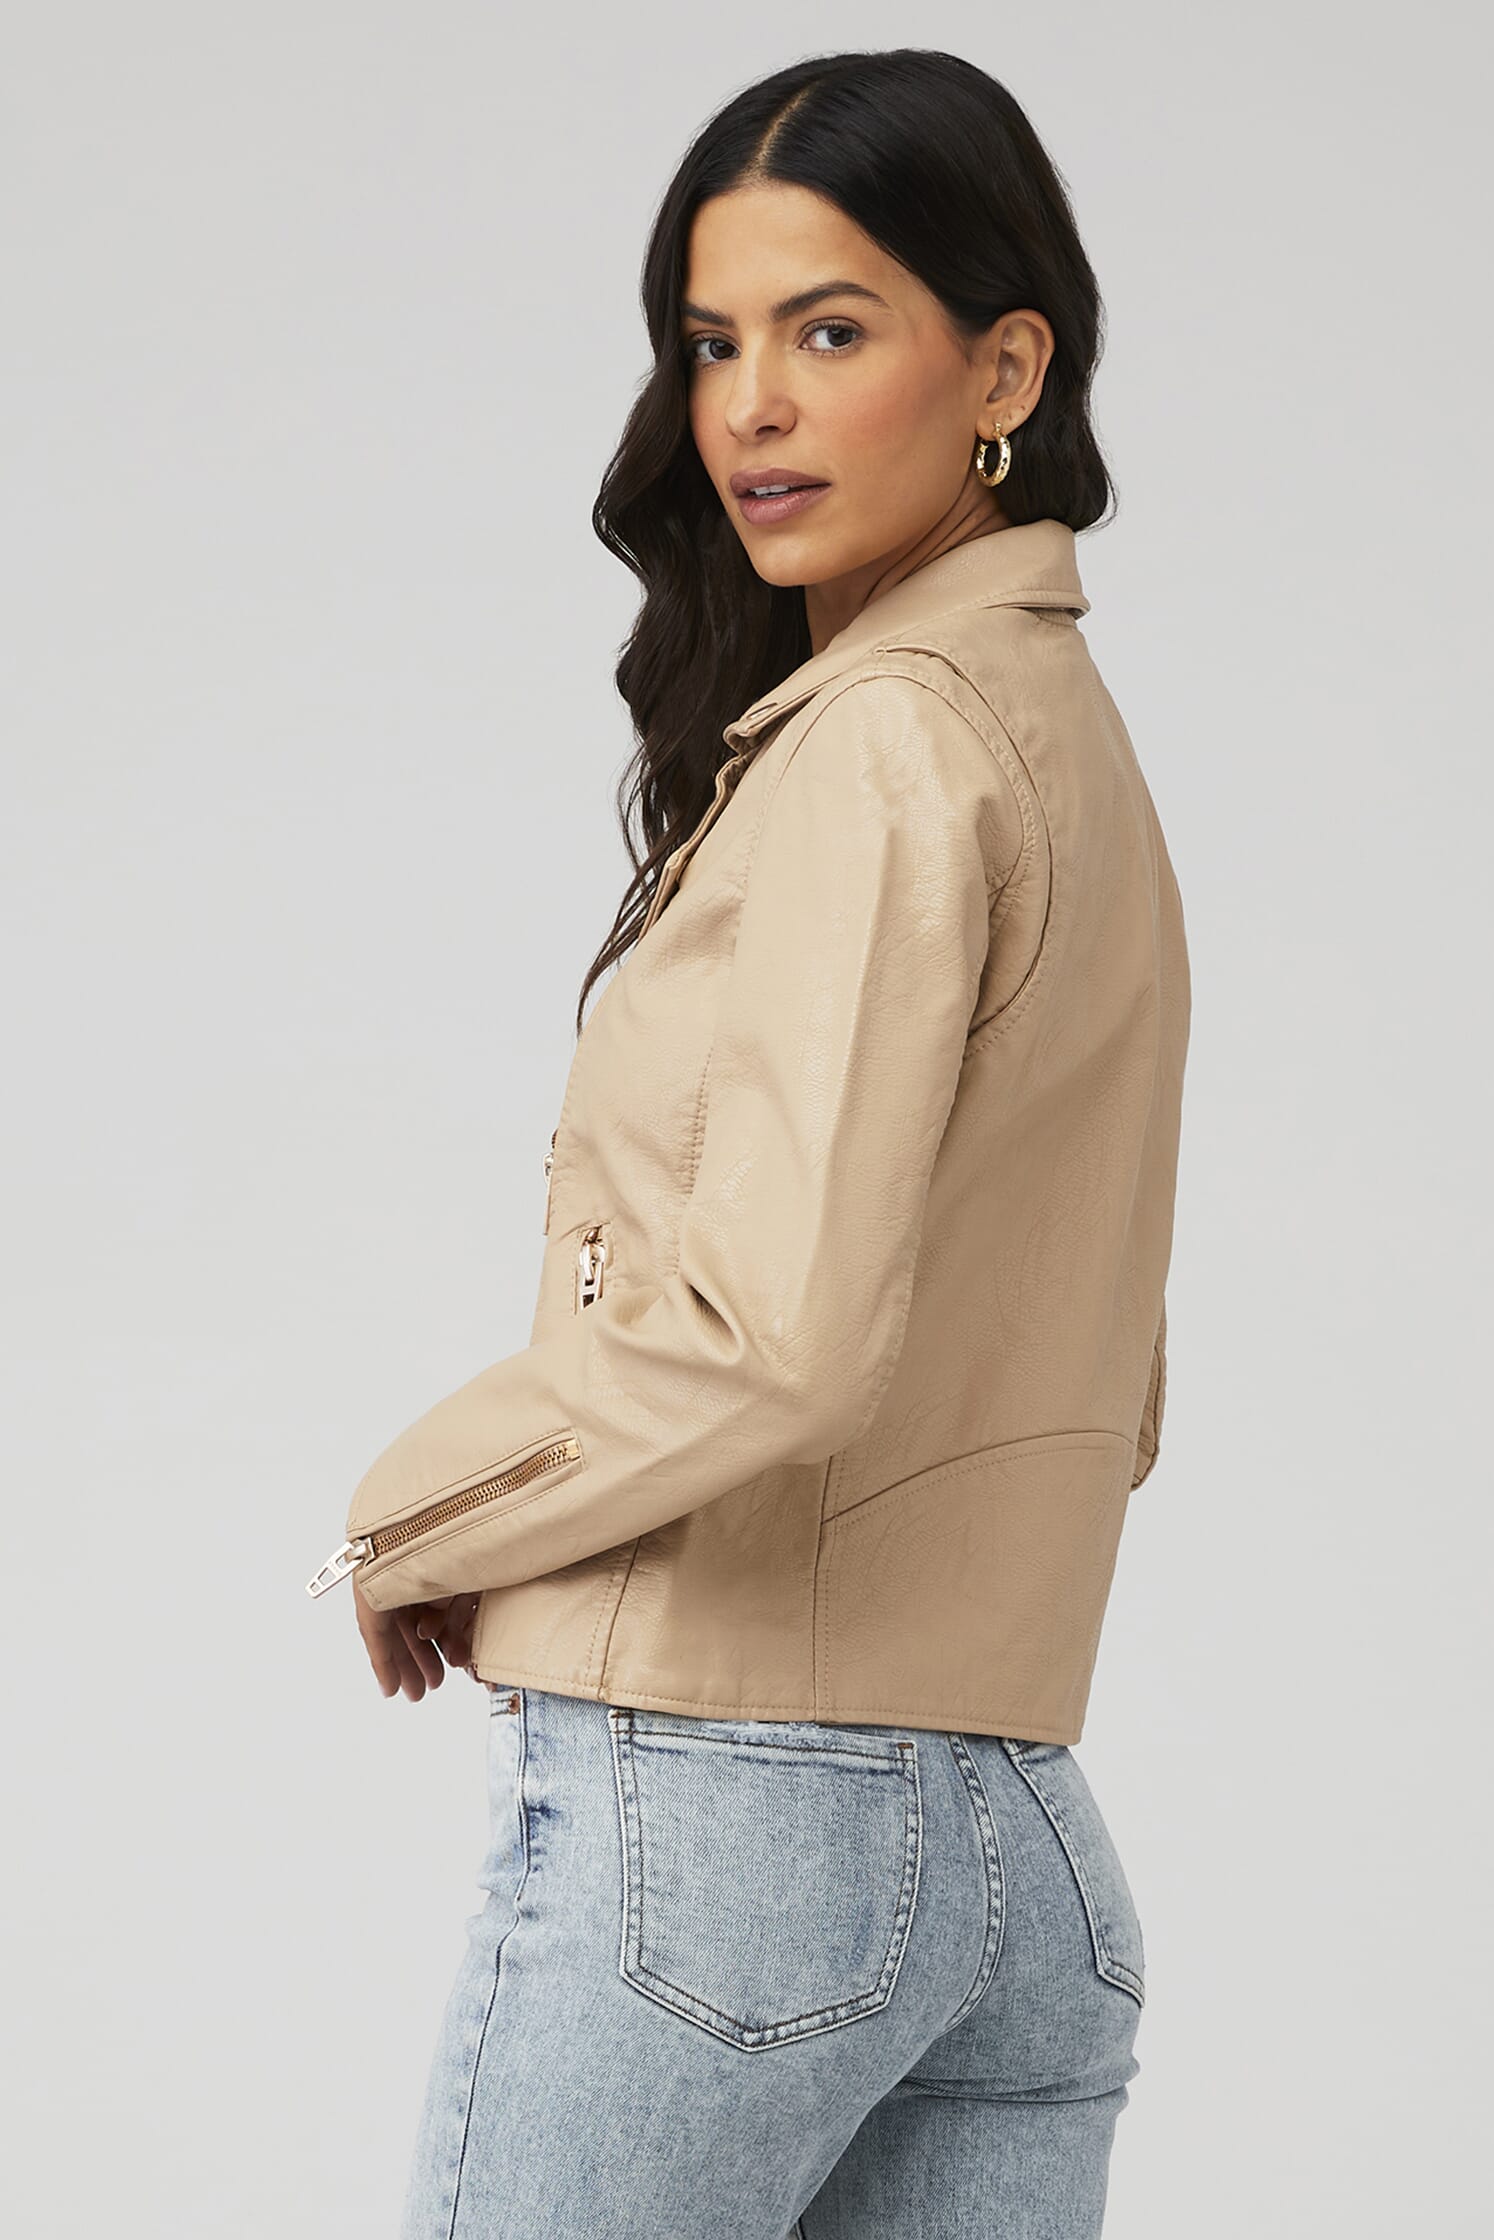 Women's Lipsy Clothing from $34